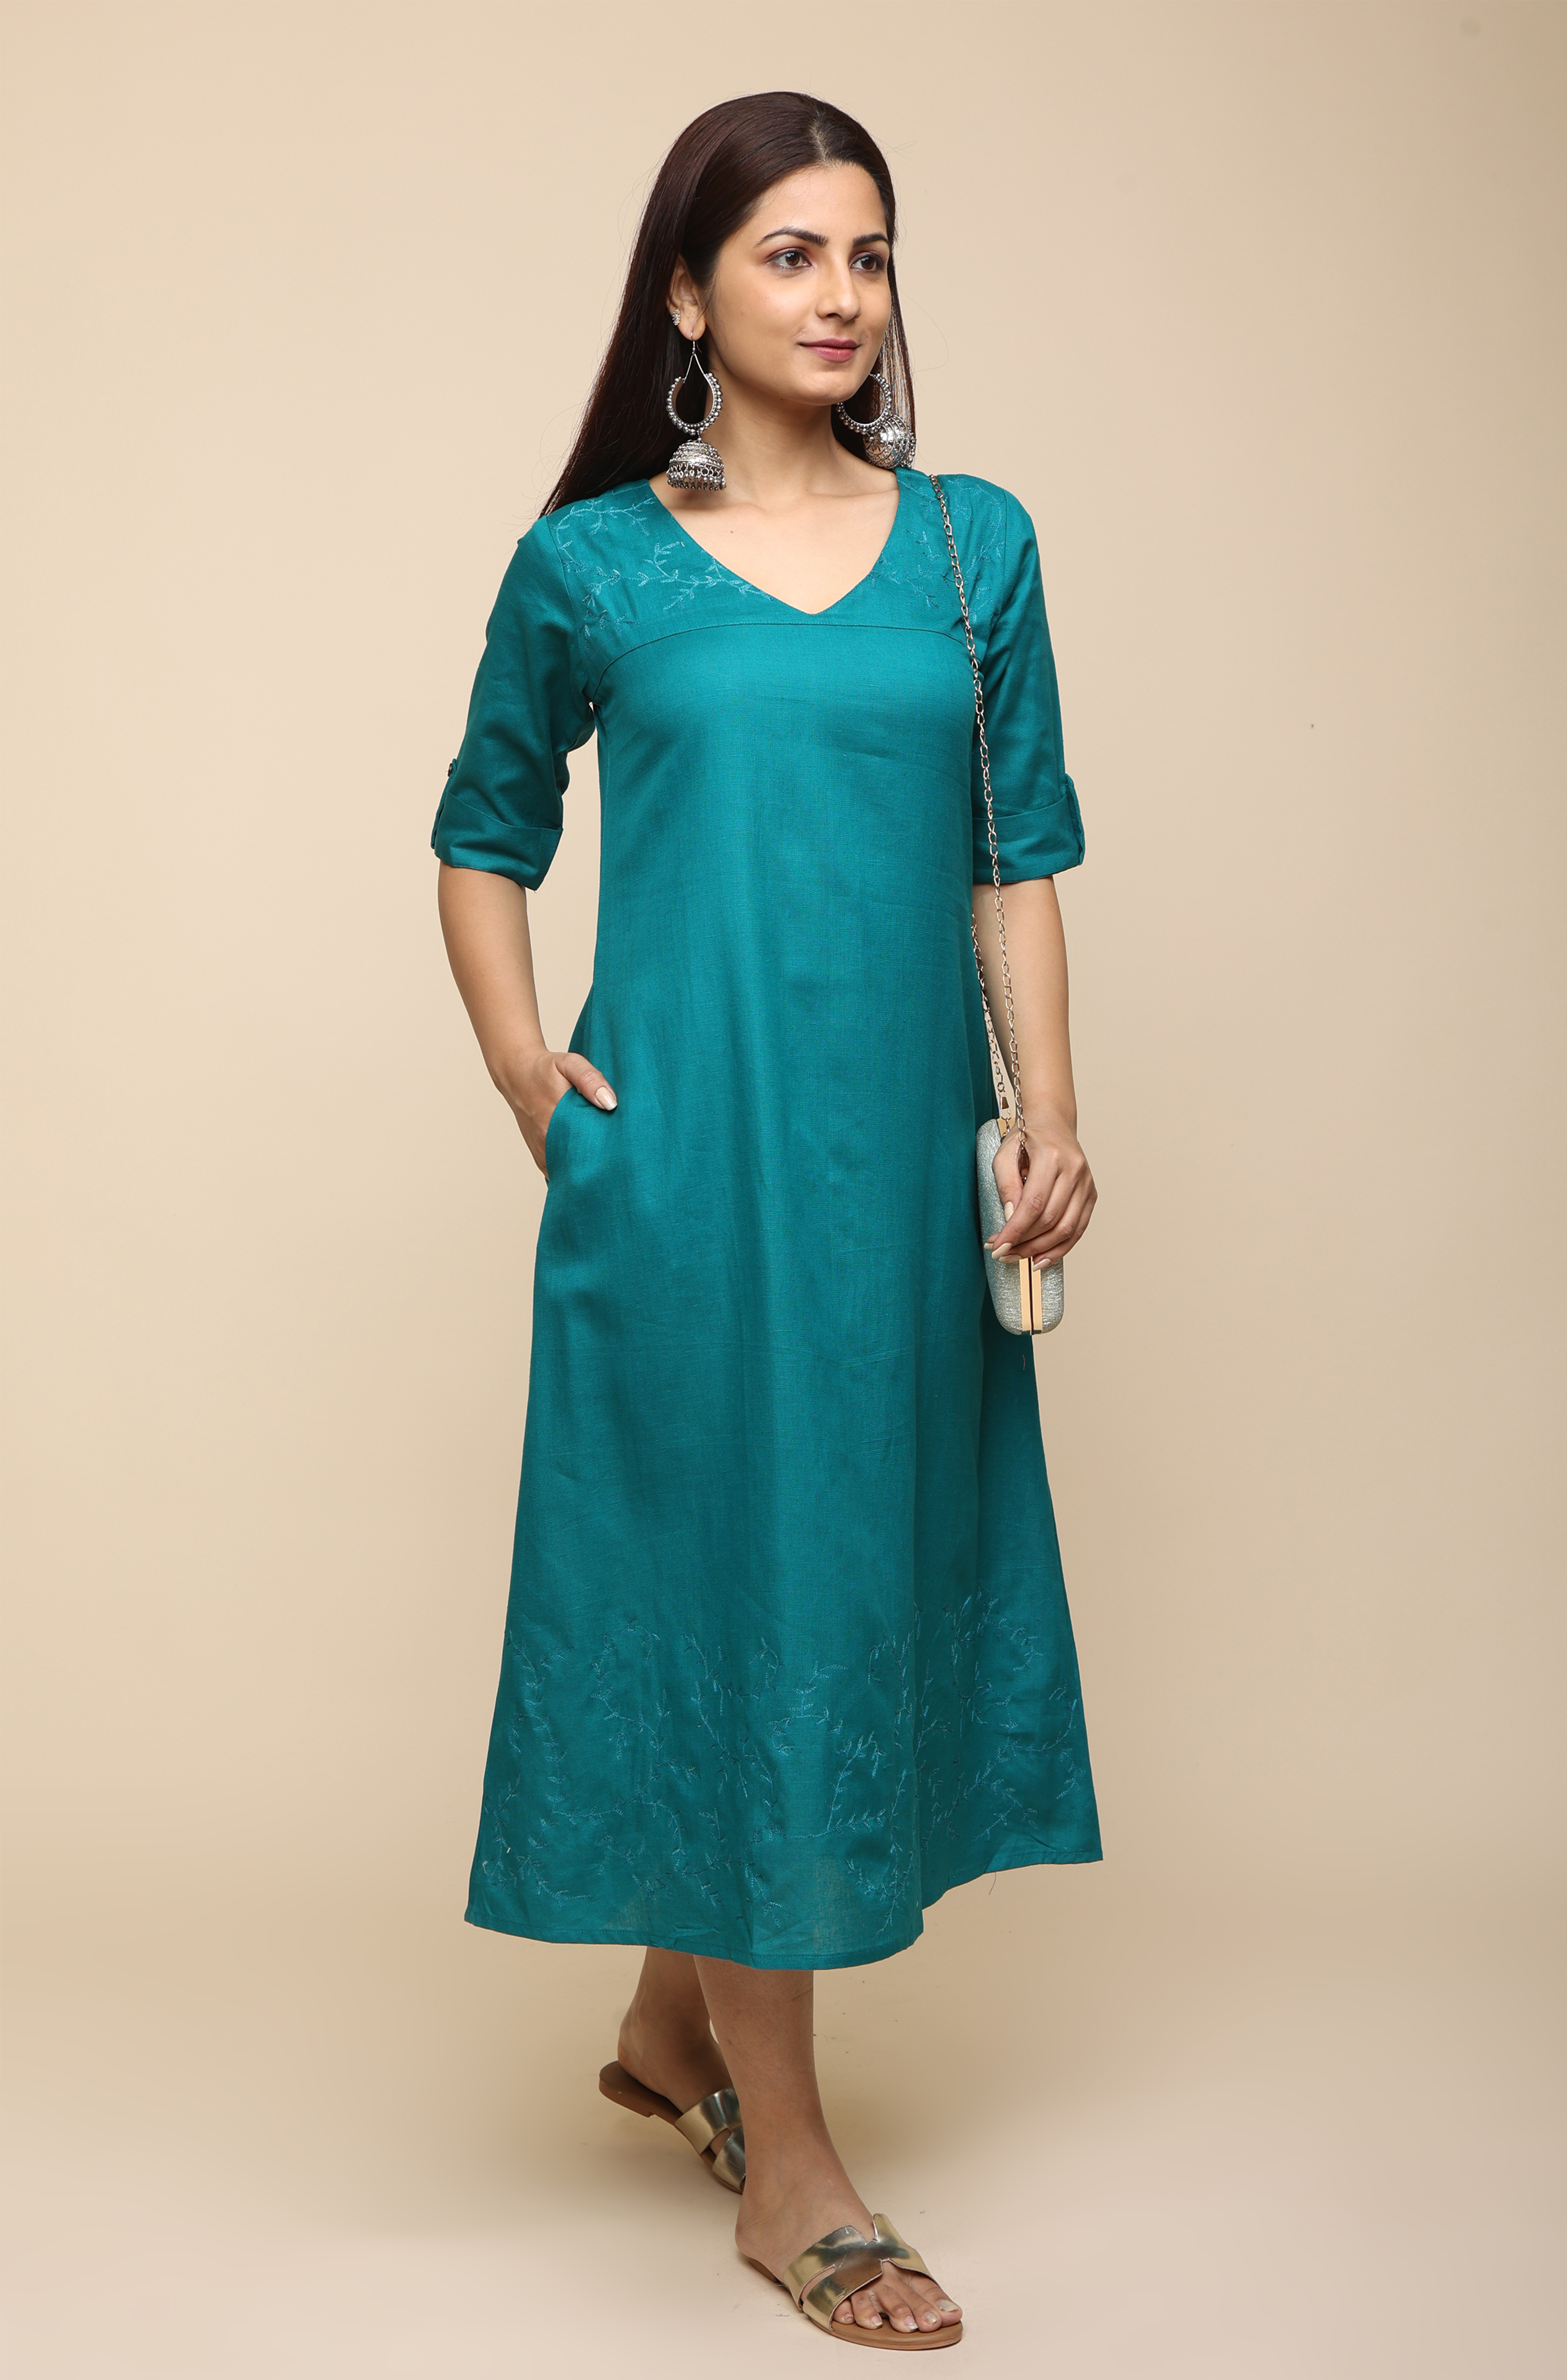 Embroidered casual cotton dress